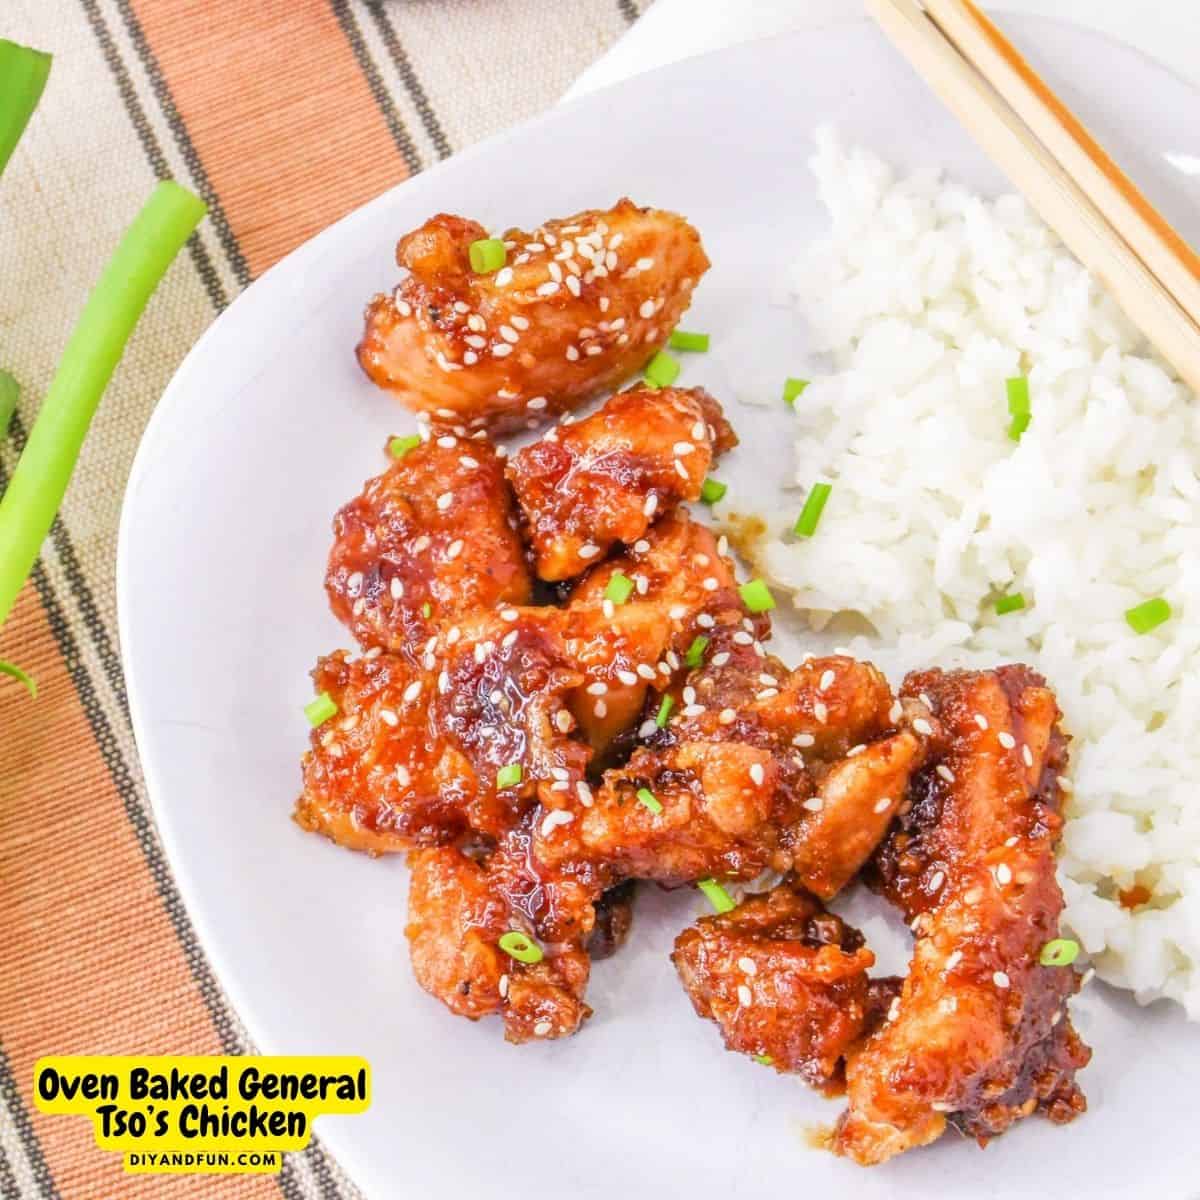 Oven Baked General Tso’s Chicken, a simple and delicious sweet and spicy meal recipe that can be made in about a half hour.